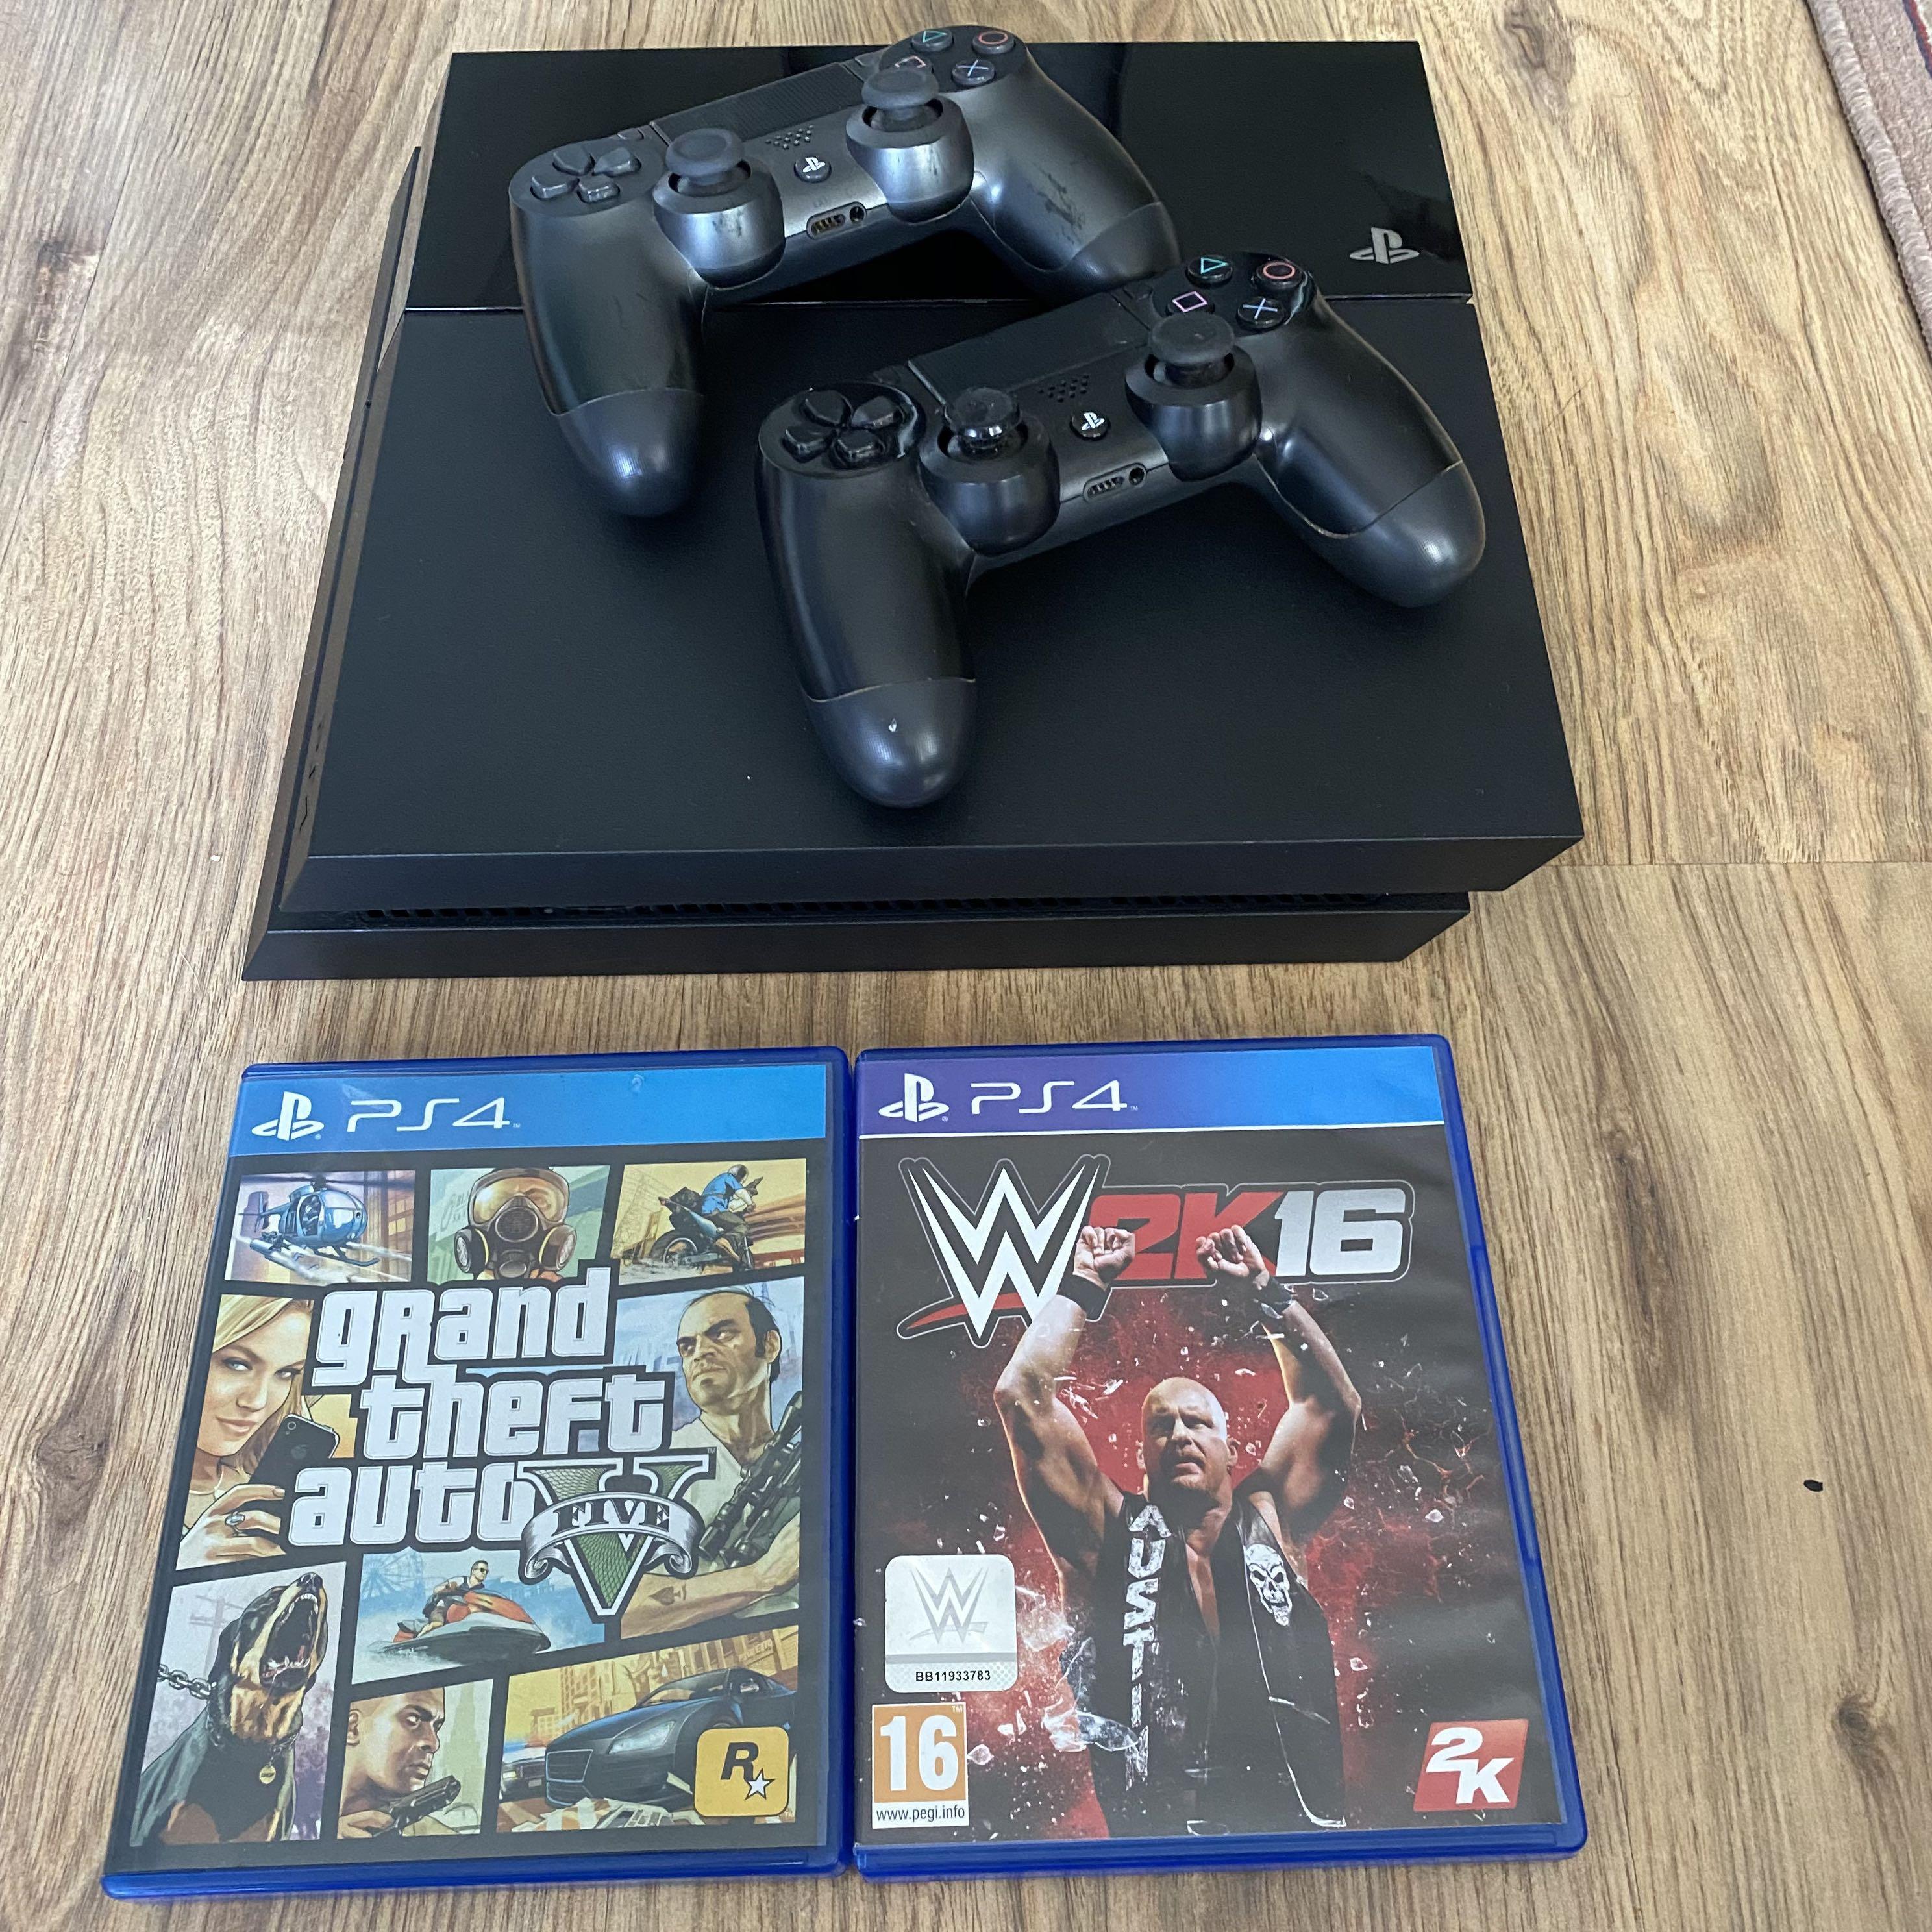 two controller games ps4